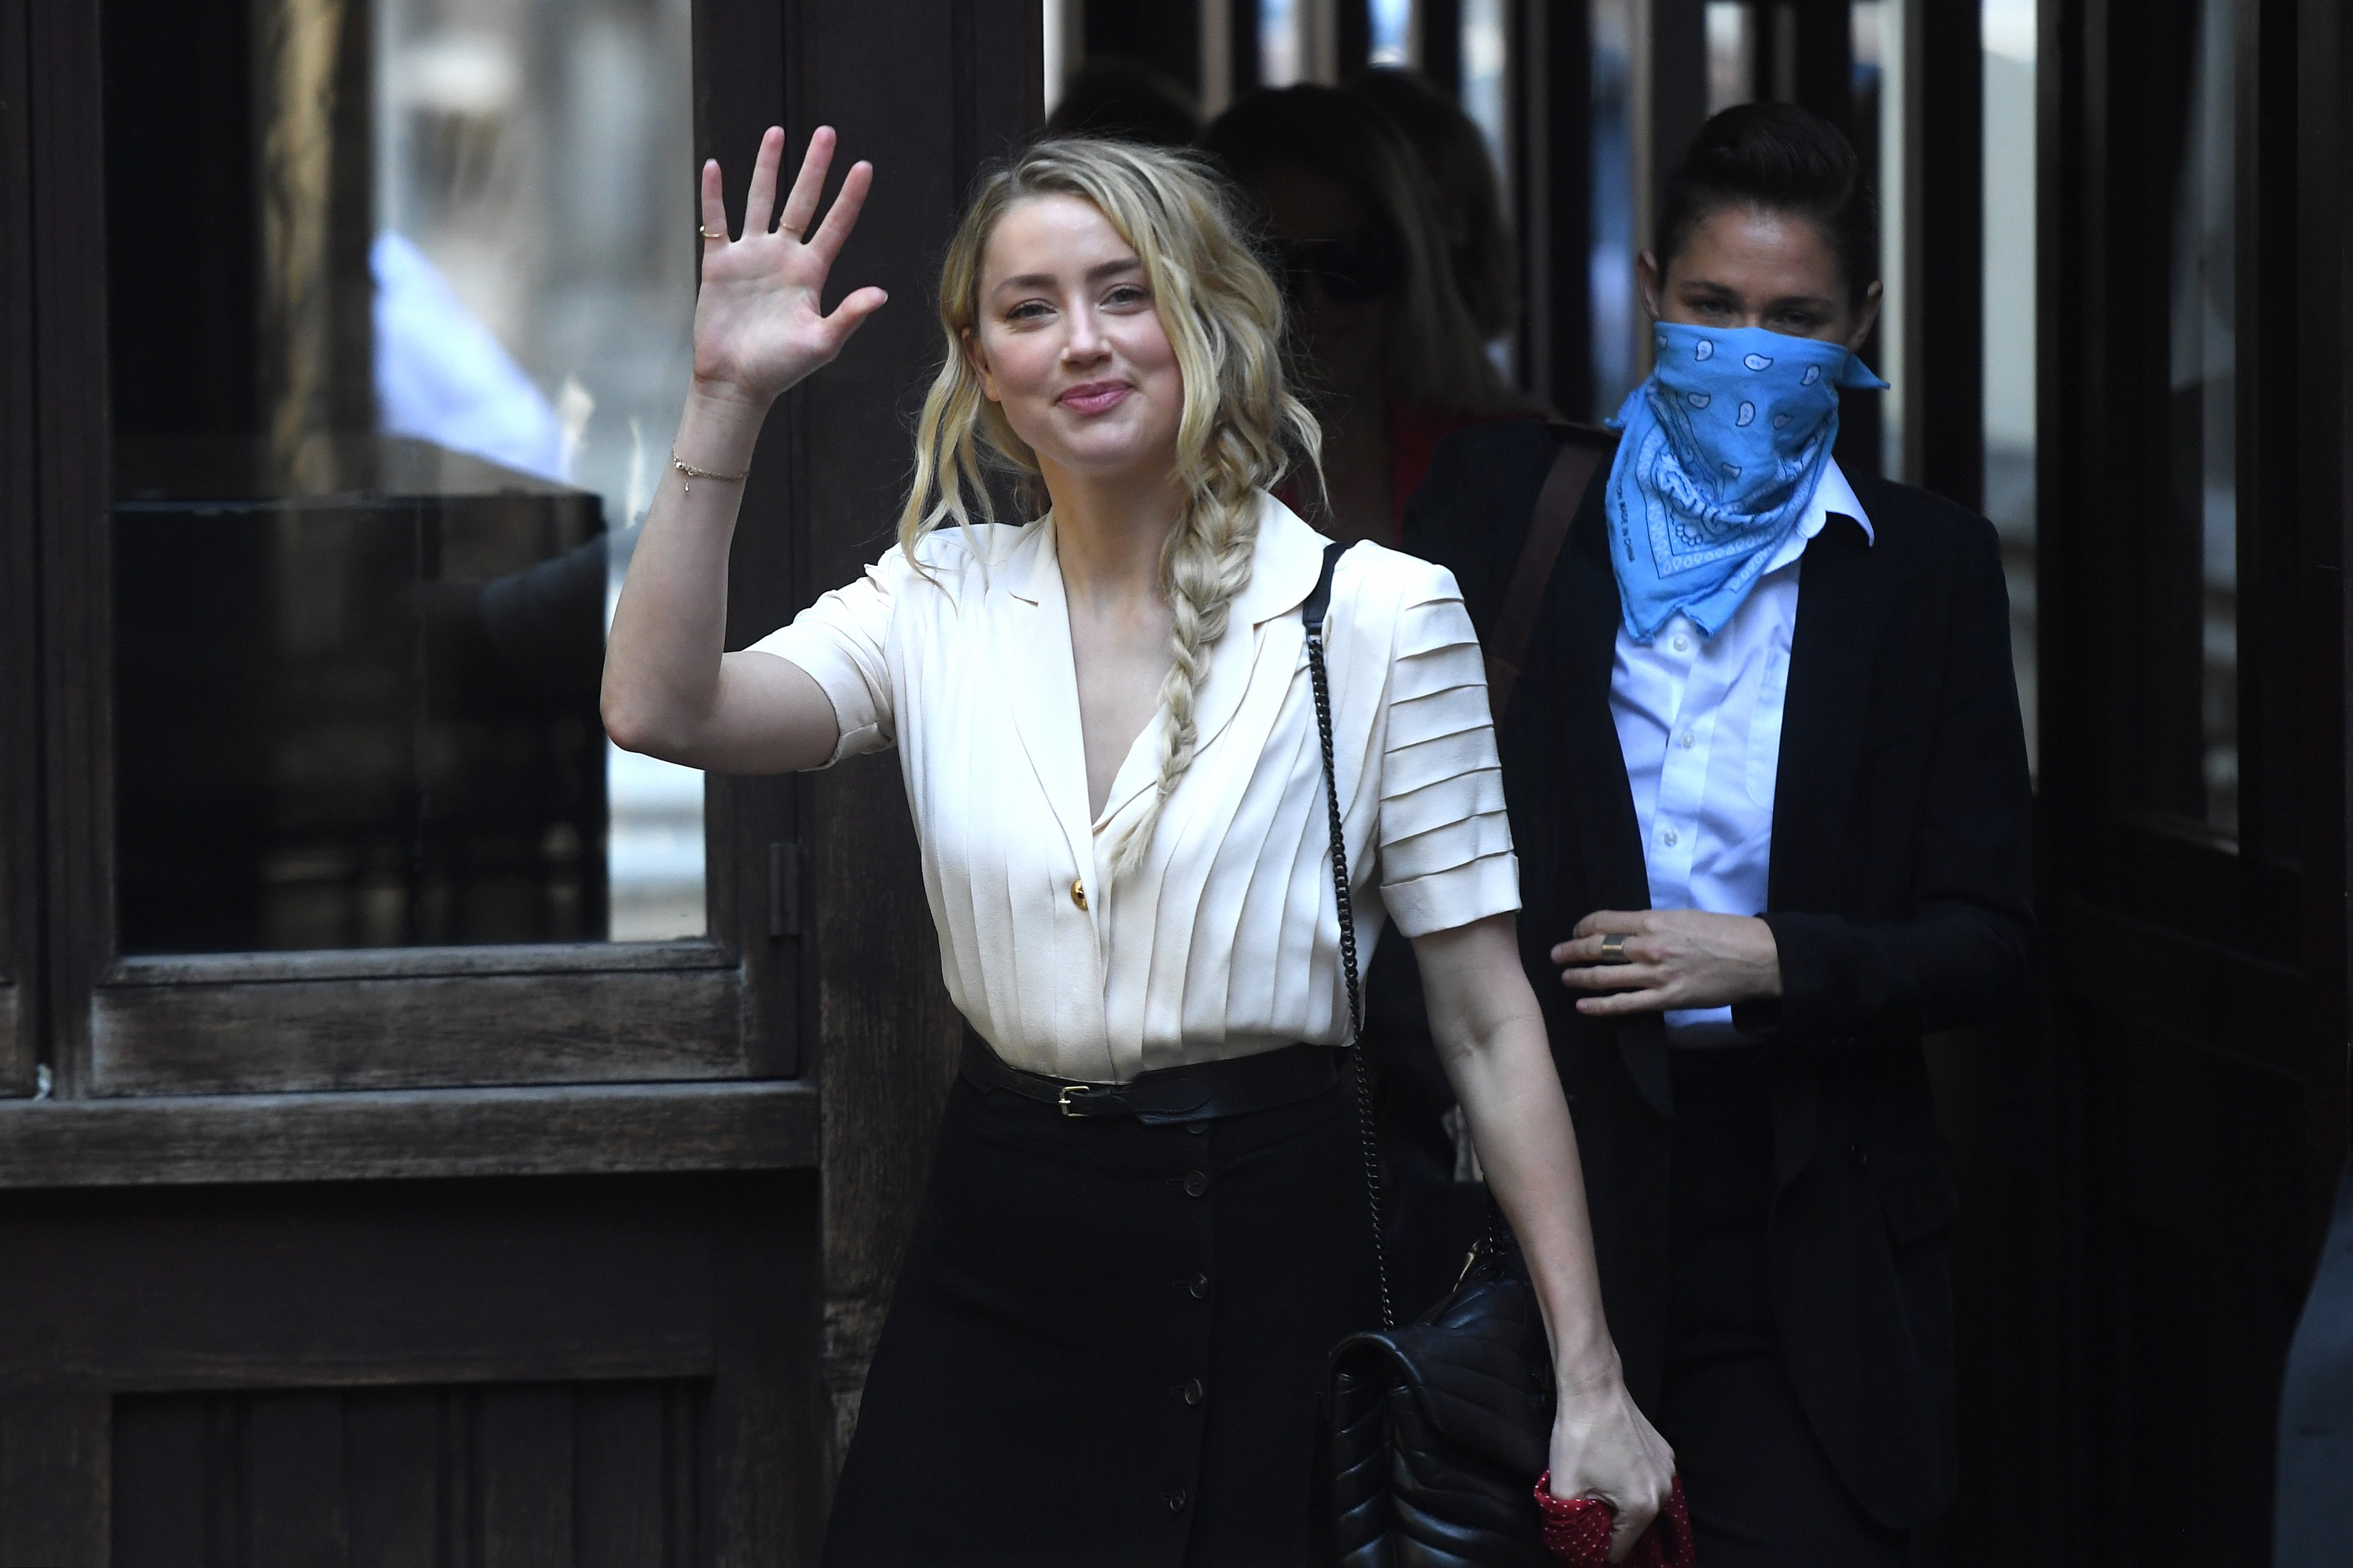 Amber Heard arrives at the Royal Courts of Justice, Strand on July 20, 2020 in London, England. | Source: Getty Images